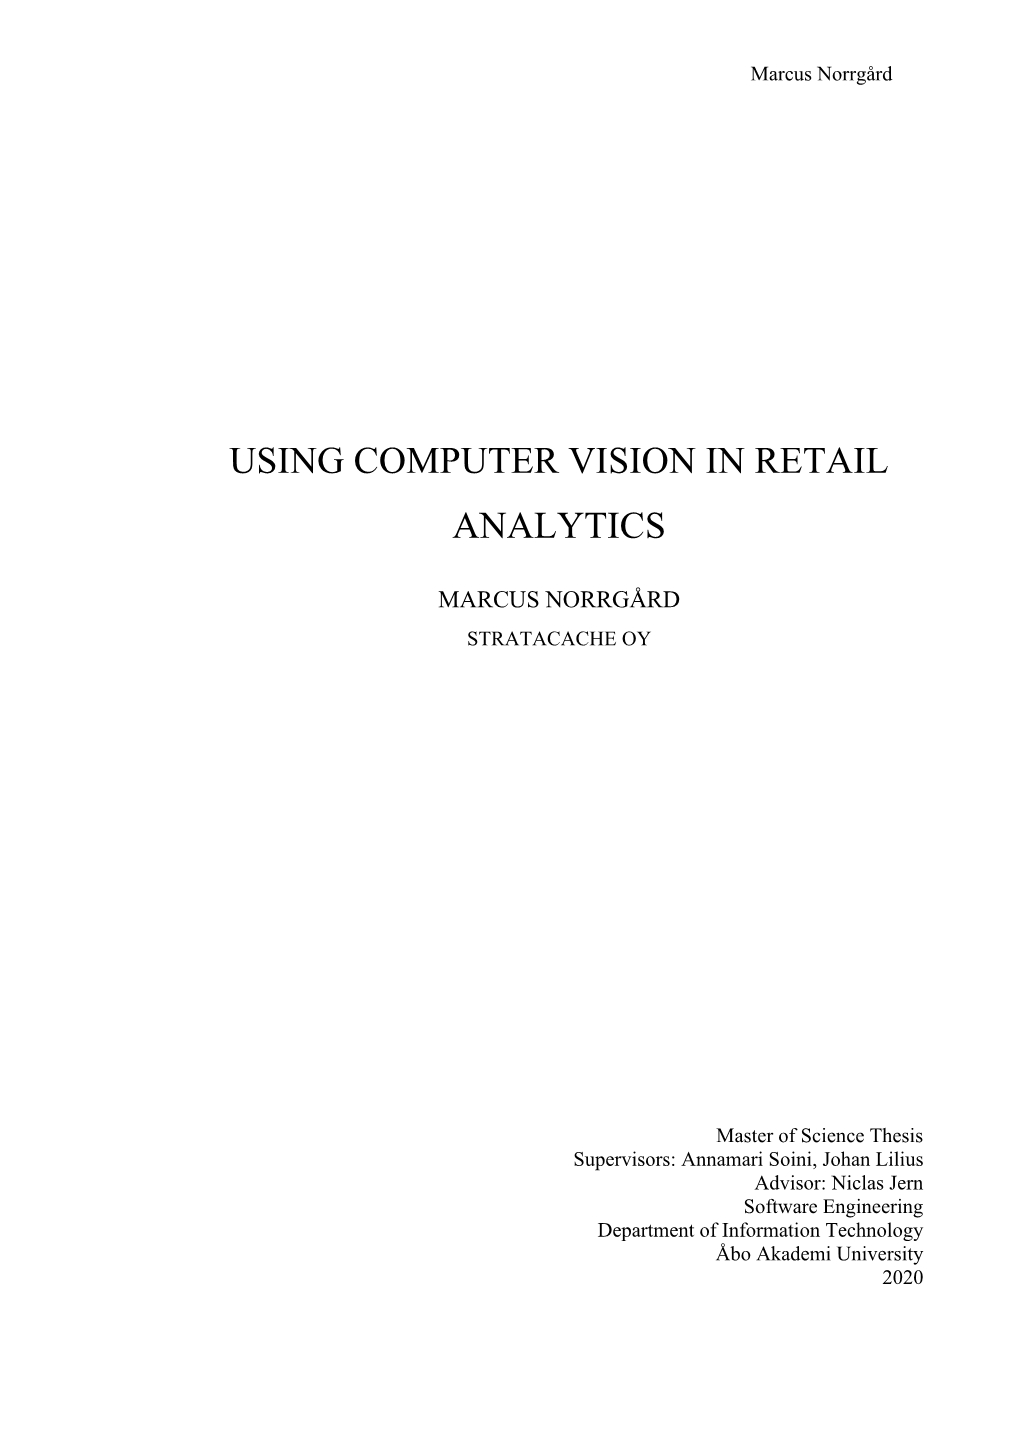 Using Computer Vision in Retail Analytics